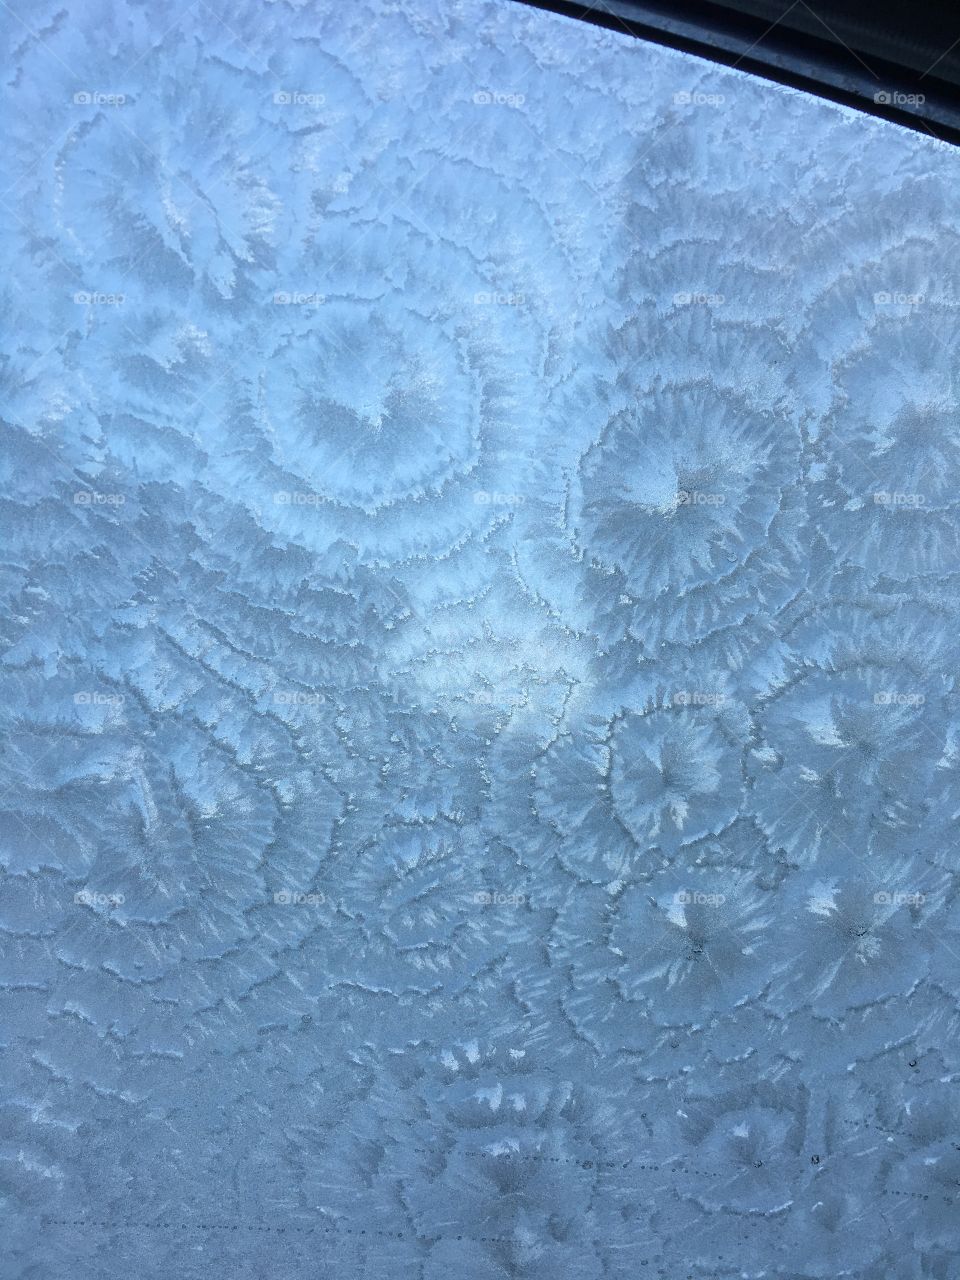 Ice on my cars window, on a freezing cold winters morning.